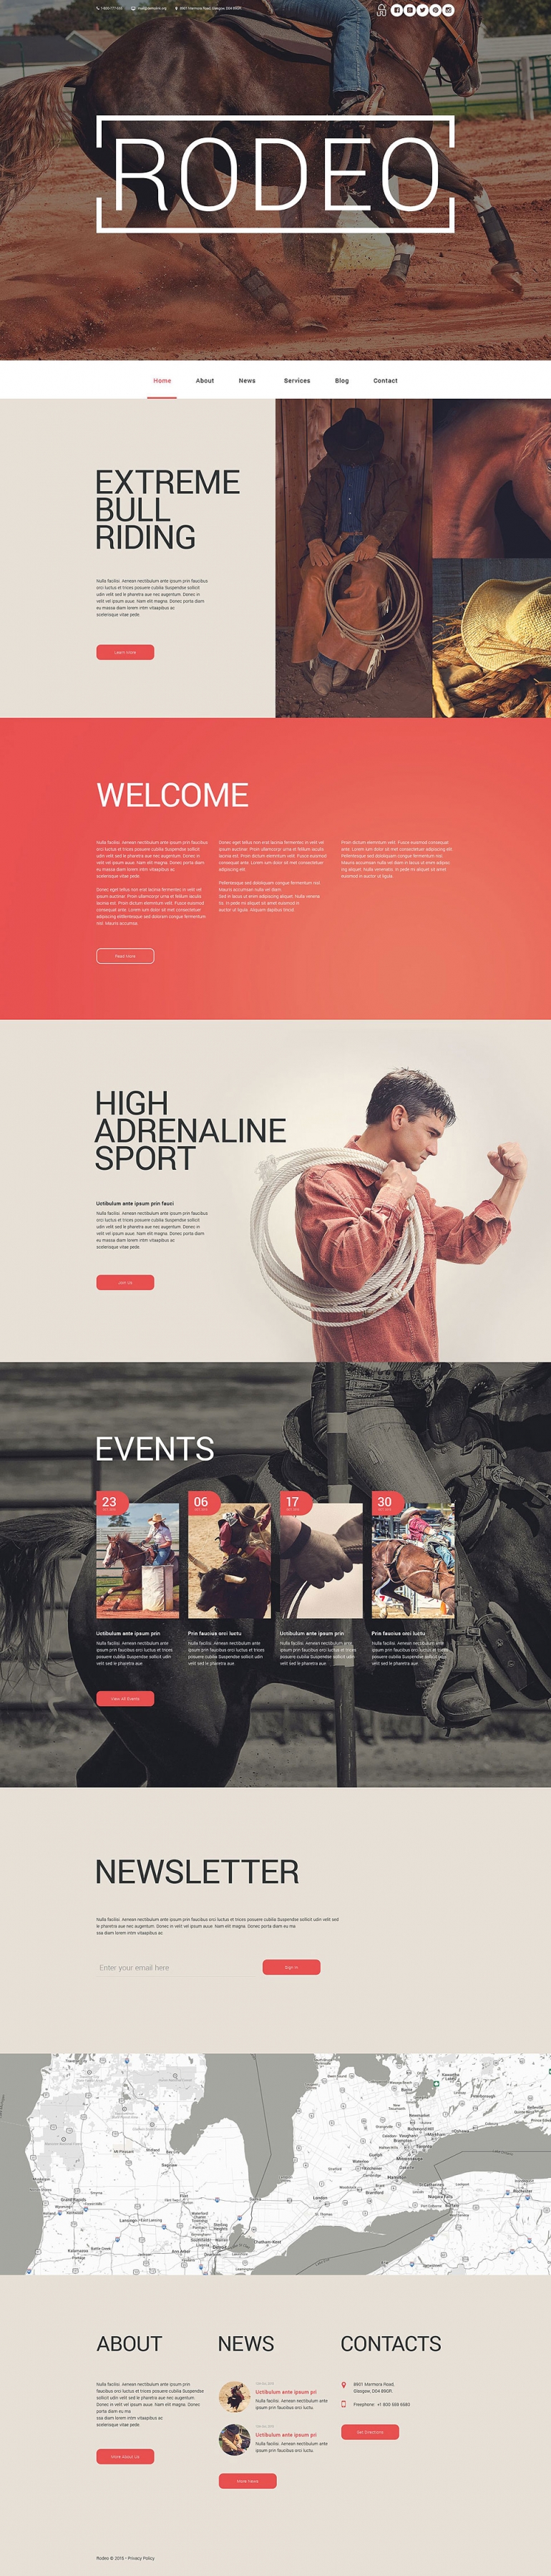 15 Templates With Awesome Hero Headers 12